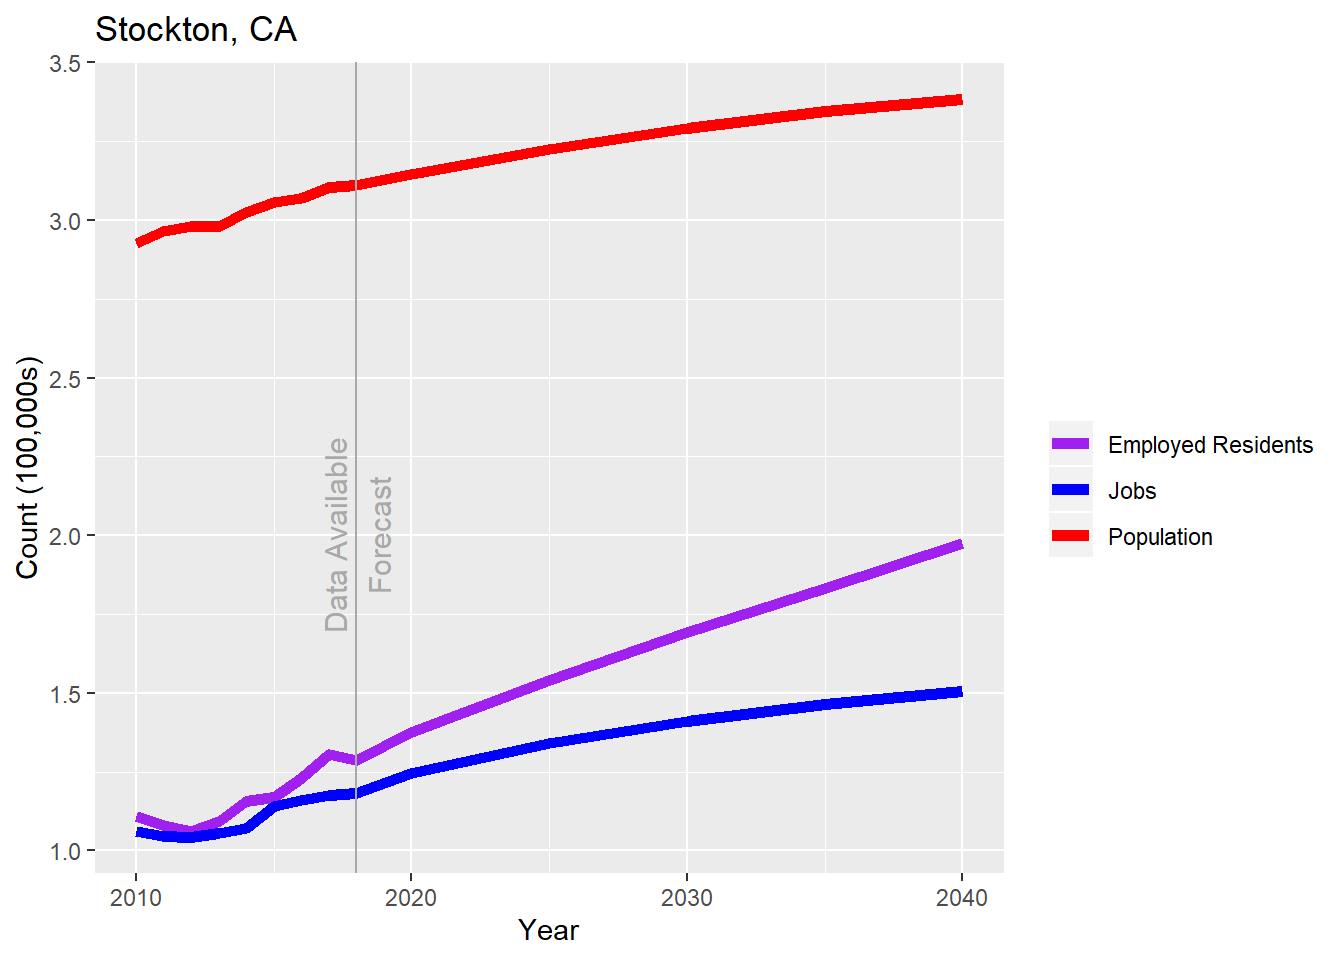 Historical population, employed residents, and jobs for Stockton 2010-2018, followed by projections to 2040.